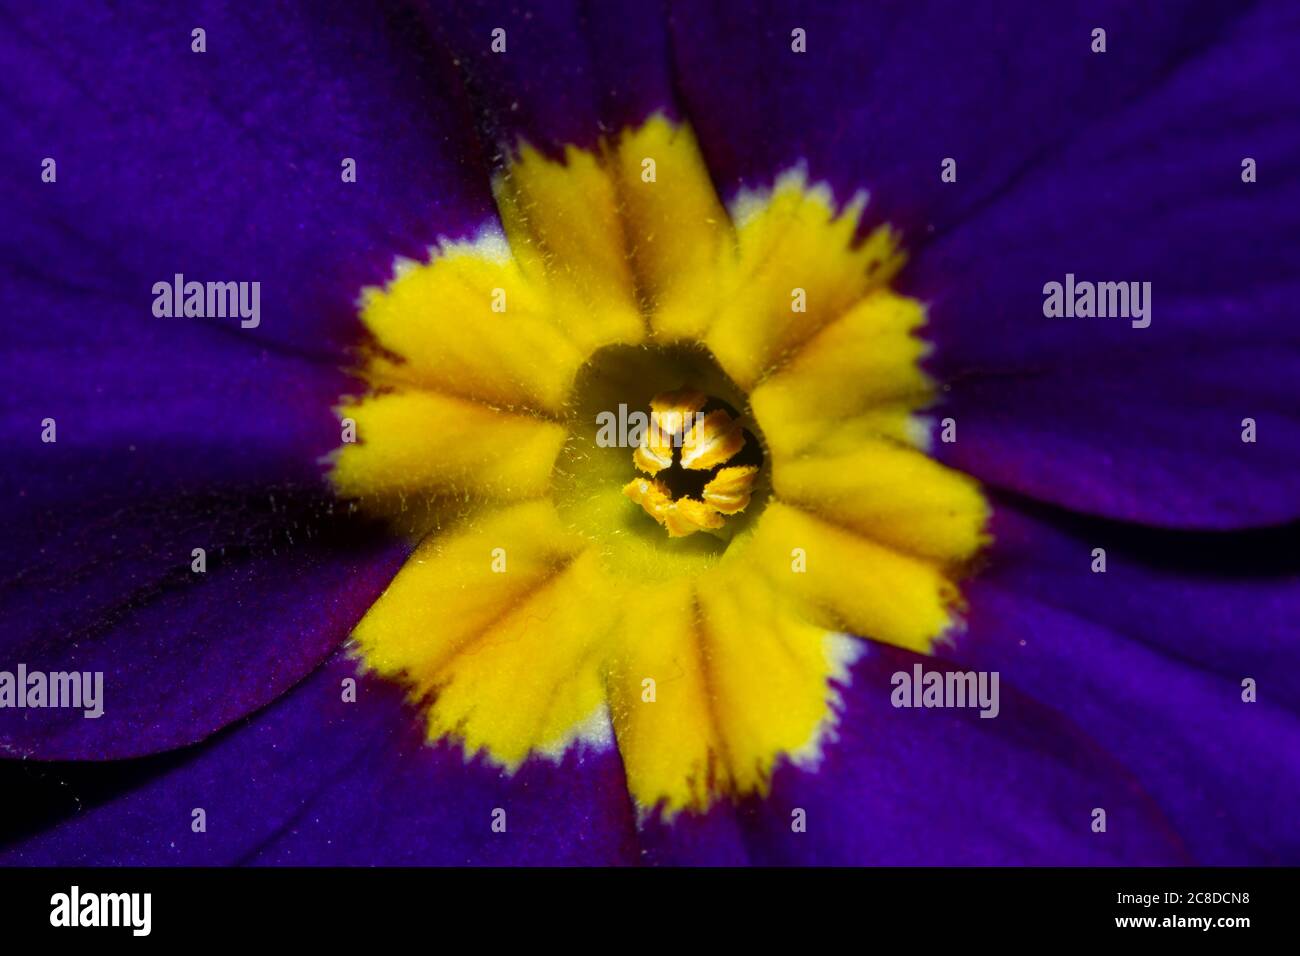 Close up image of a Primula Acaulis (Primrose) flower that shows details of the flower parts. This is a vibrant purple flower with a yellow pattern in Stock Photo